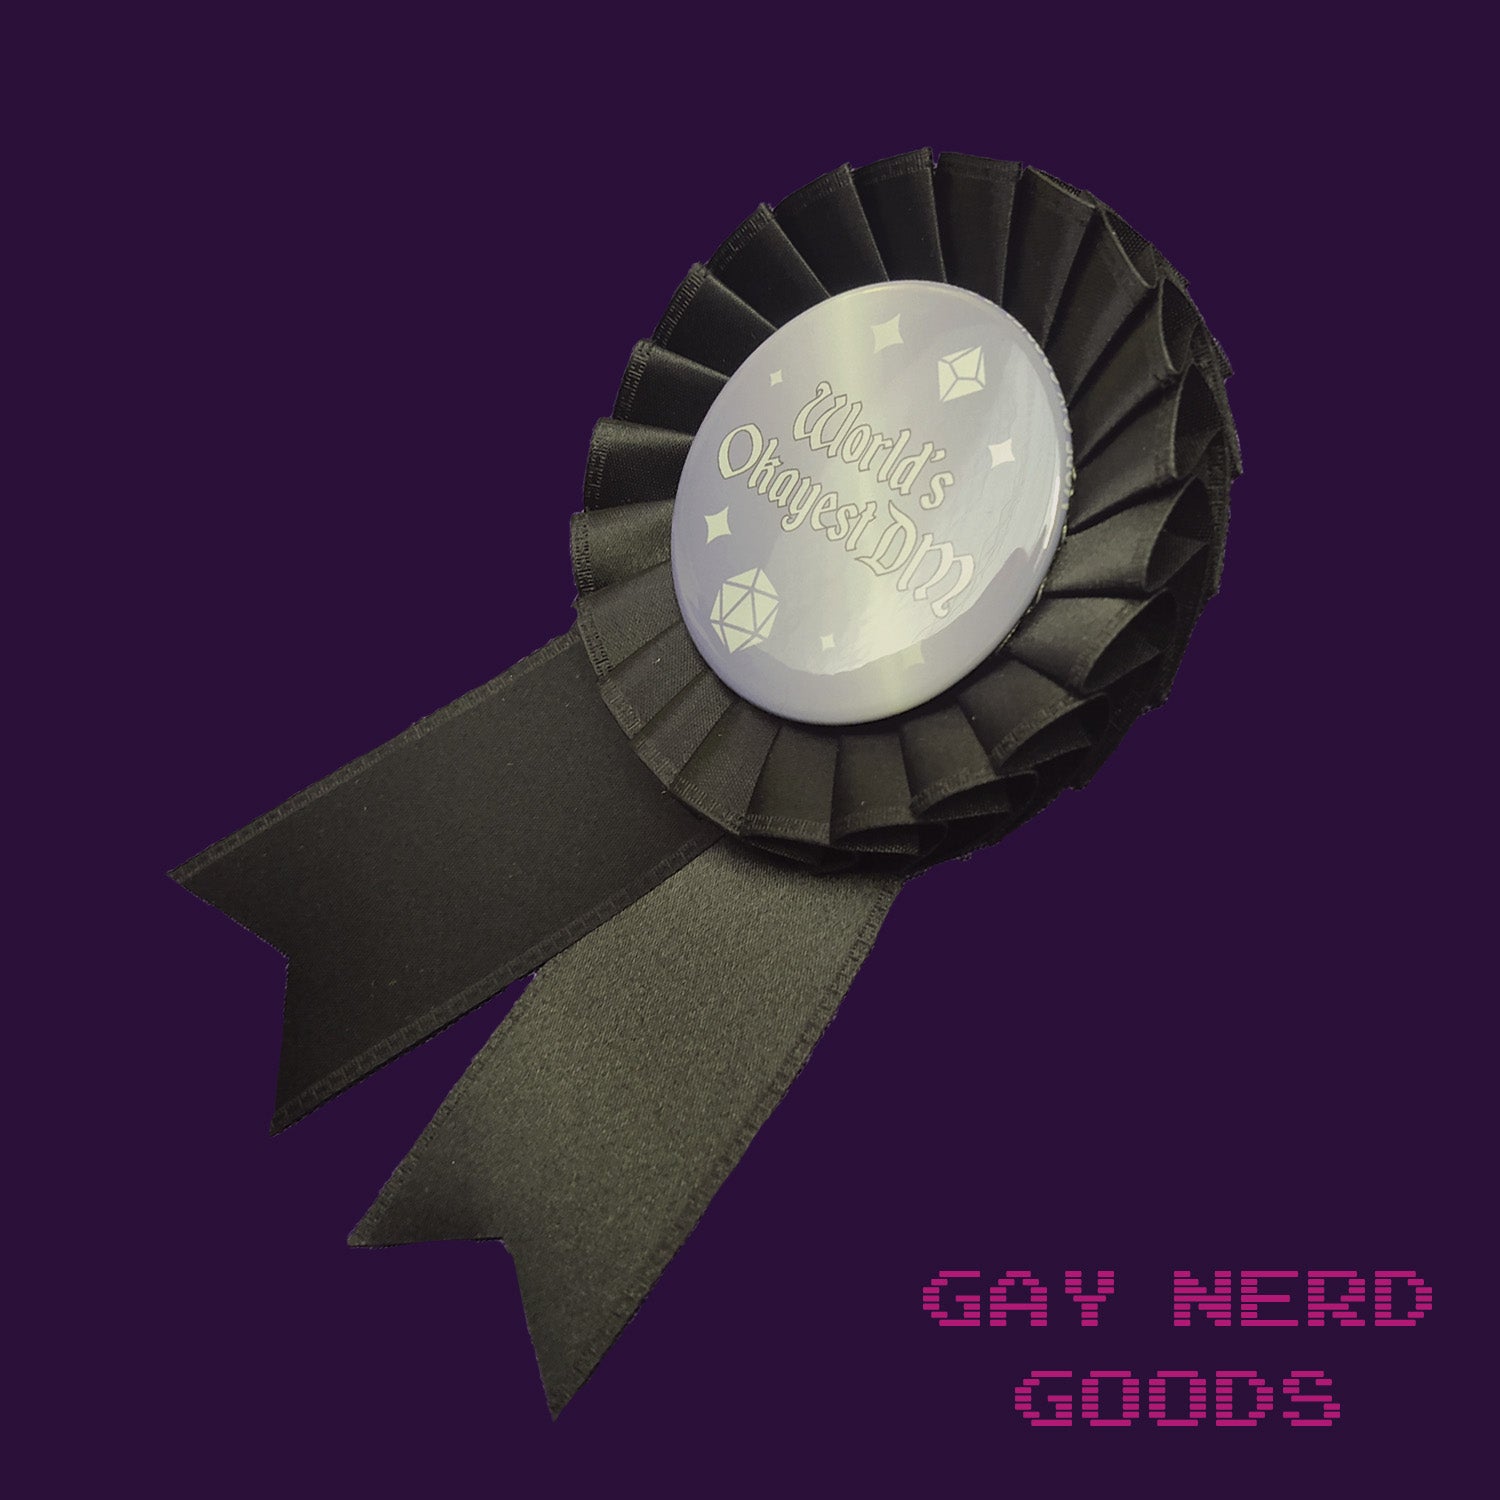 side angle view of the "world's okayest DM" award rosette on a purple background